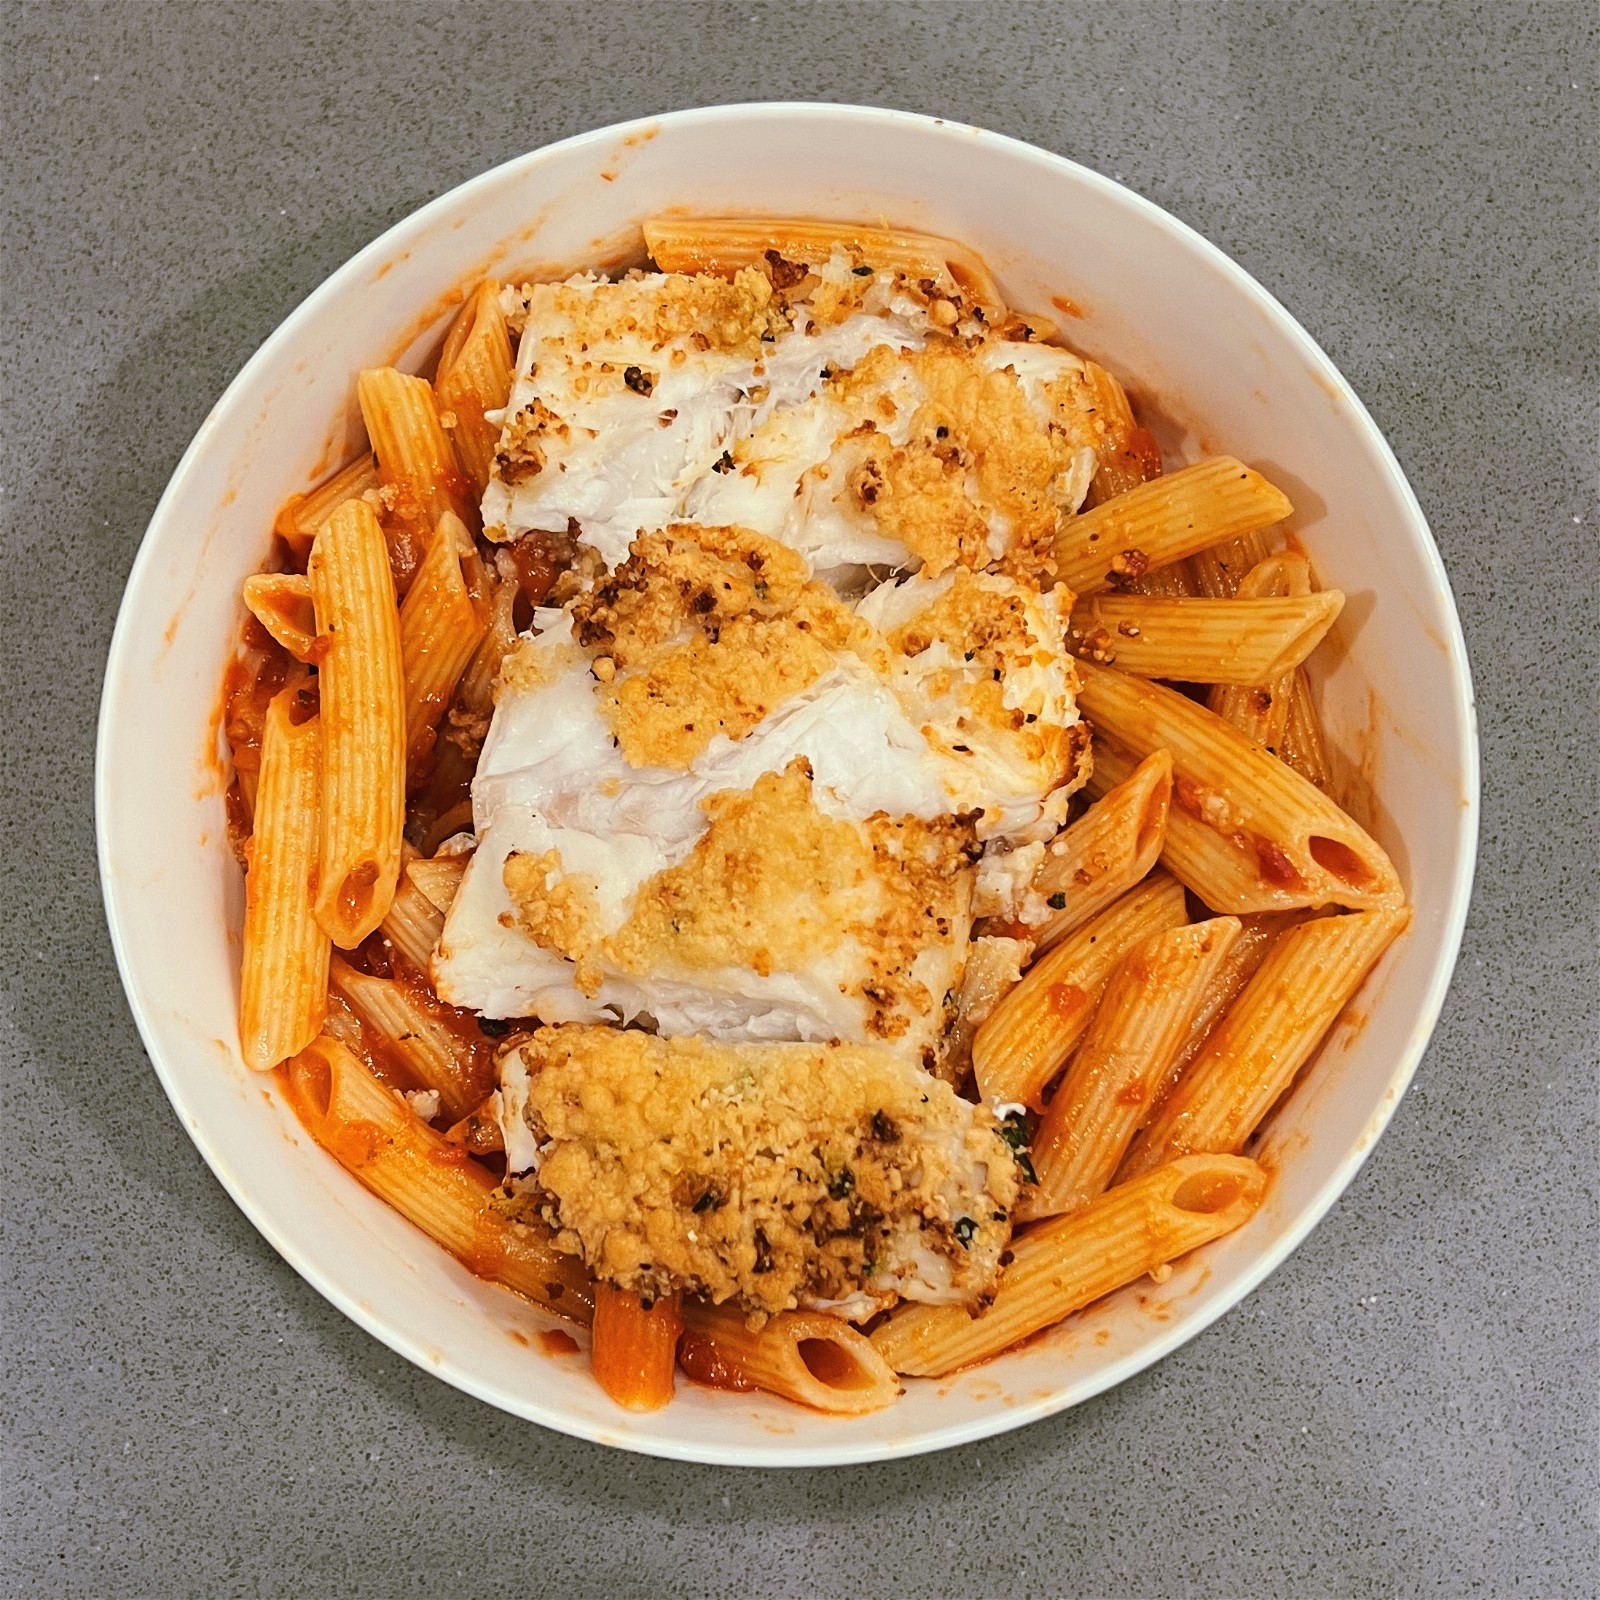 Penne Rosa with Parmesan Crusted Chicken